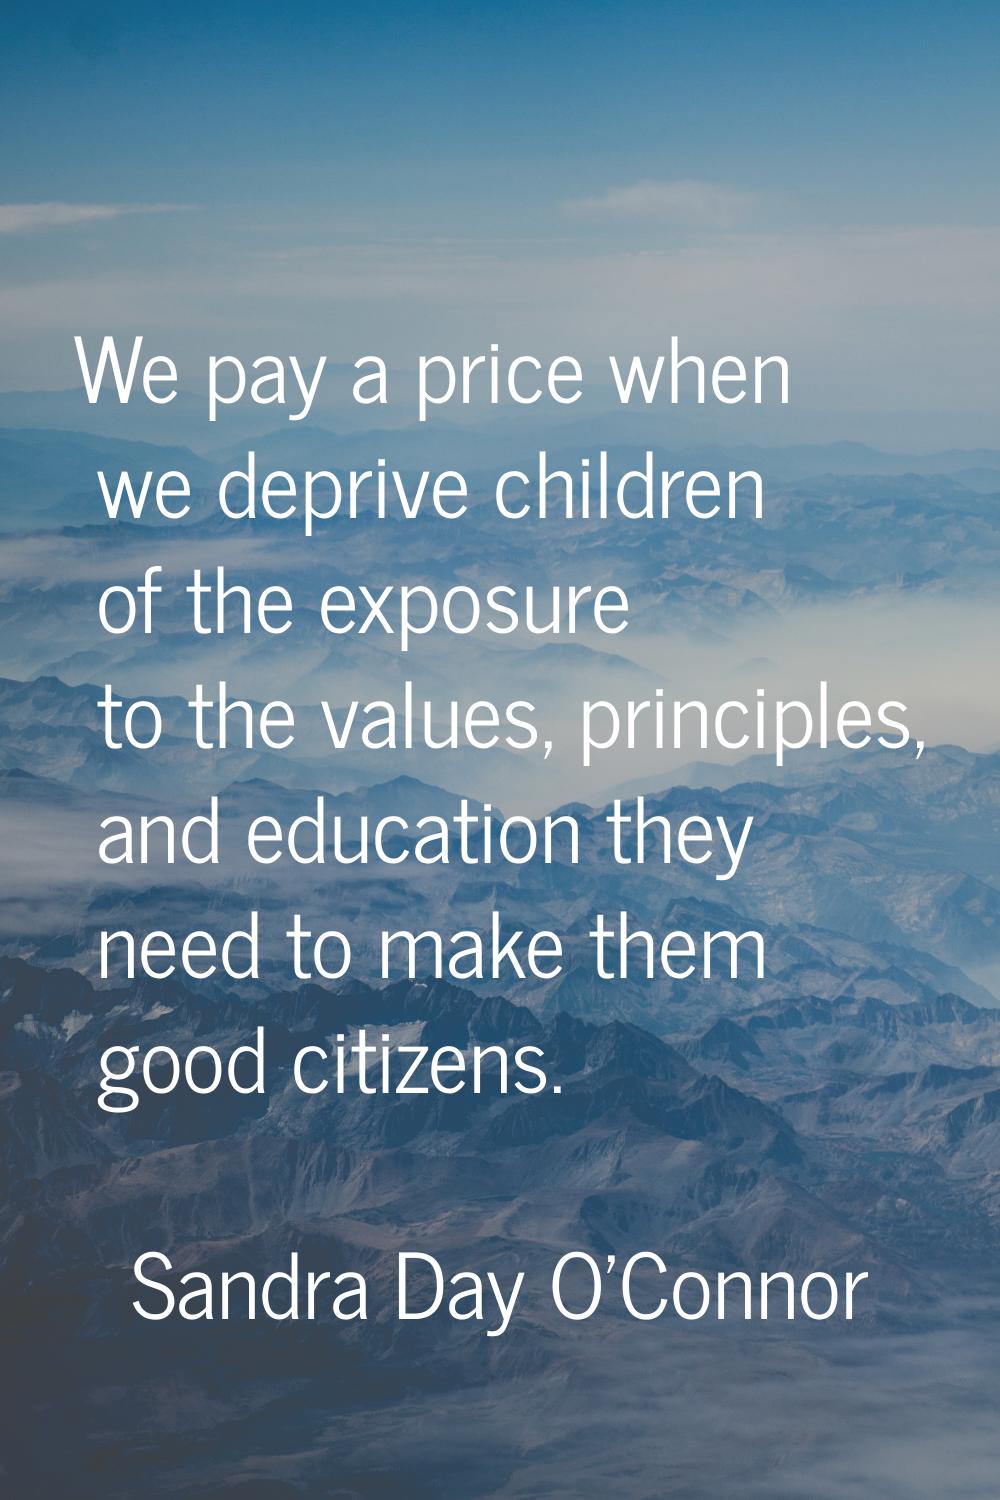 We pay a price when we deprive children of the exposure to the values, principles, and education th